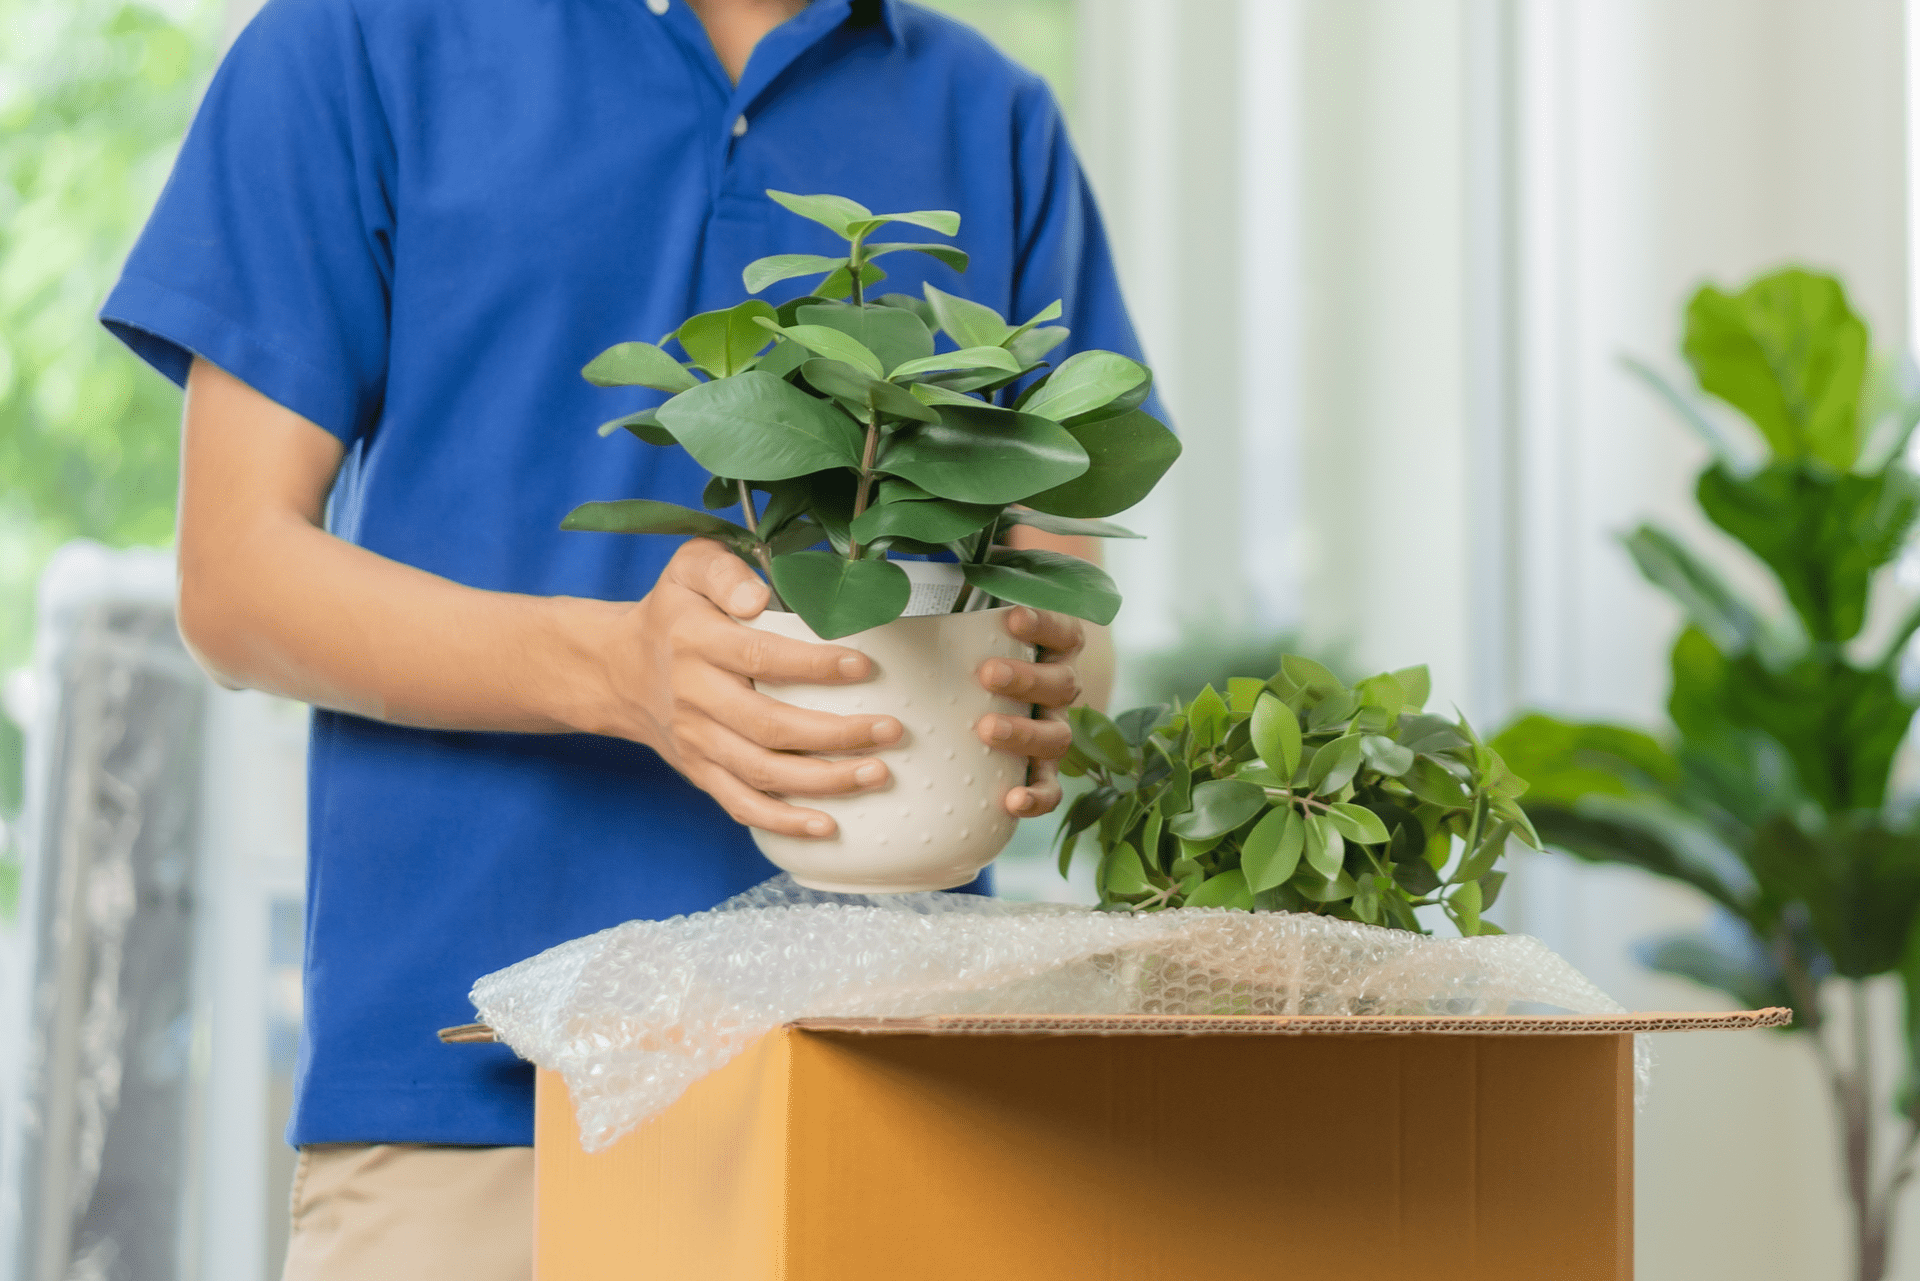 Man lifting houseplant out of box